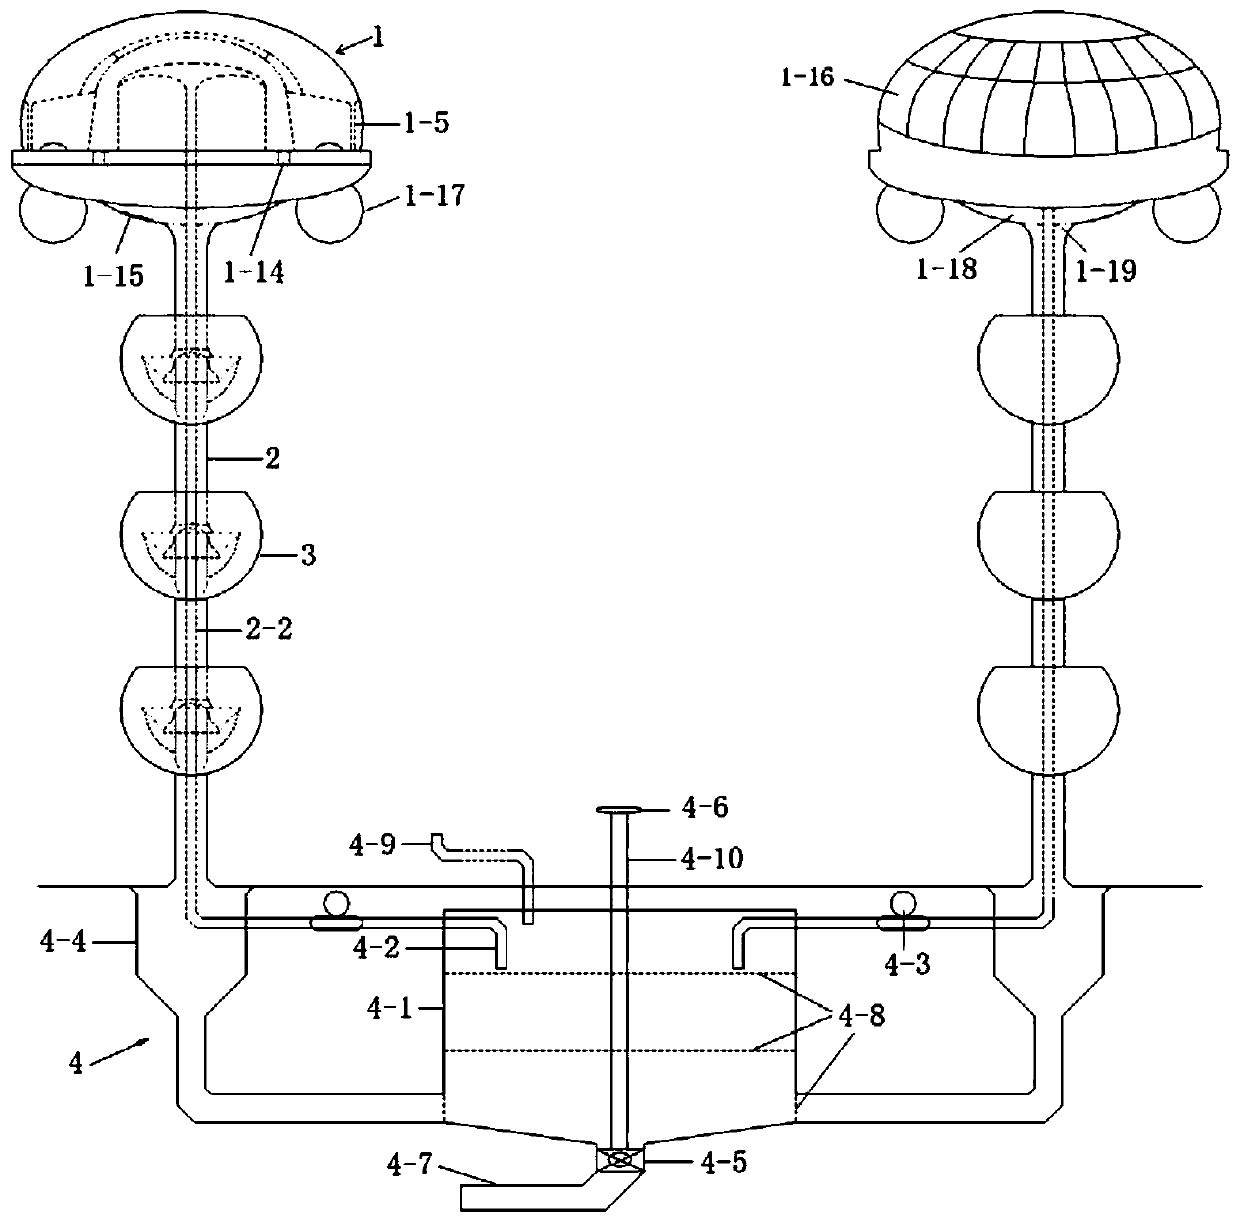 A street lamp capable of electrostatically hydroponic plants and electrostatically purifying air